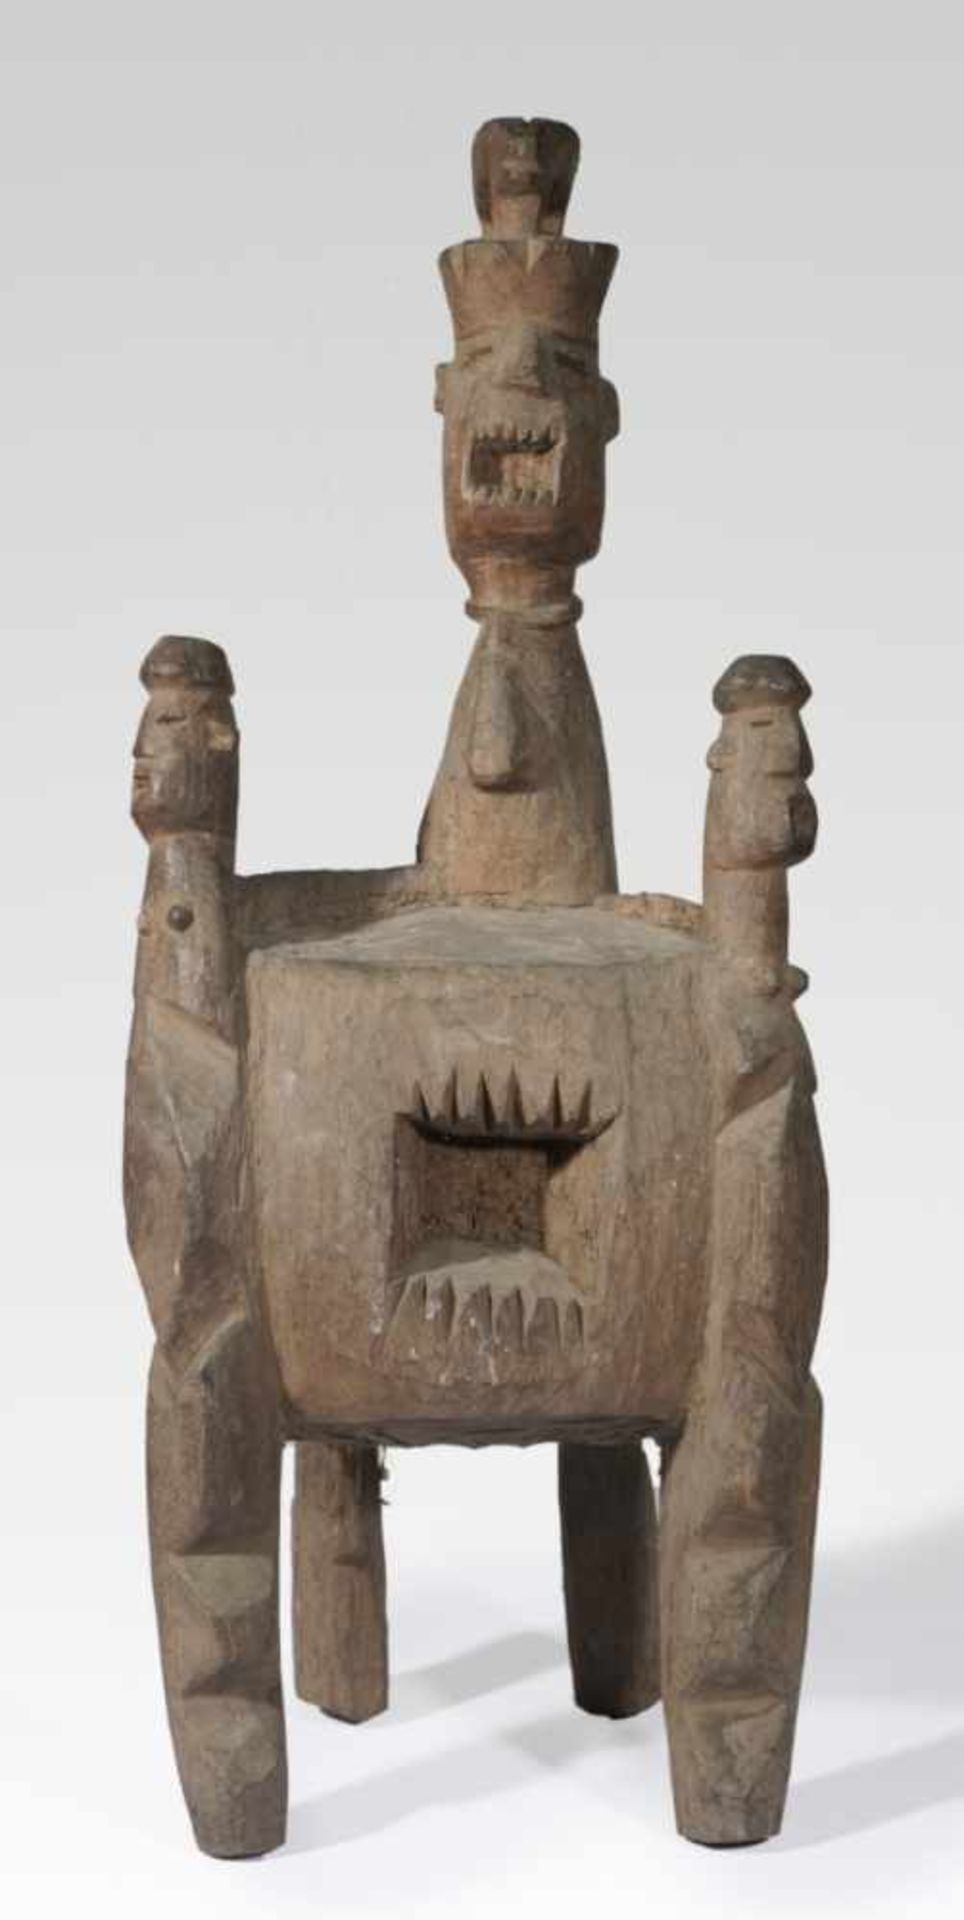 Very large altar figure, Africa, wood carving, 20th c., 91 x 22 x 35 cm, condition: One